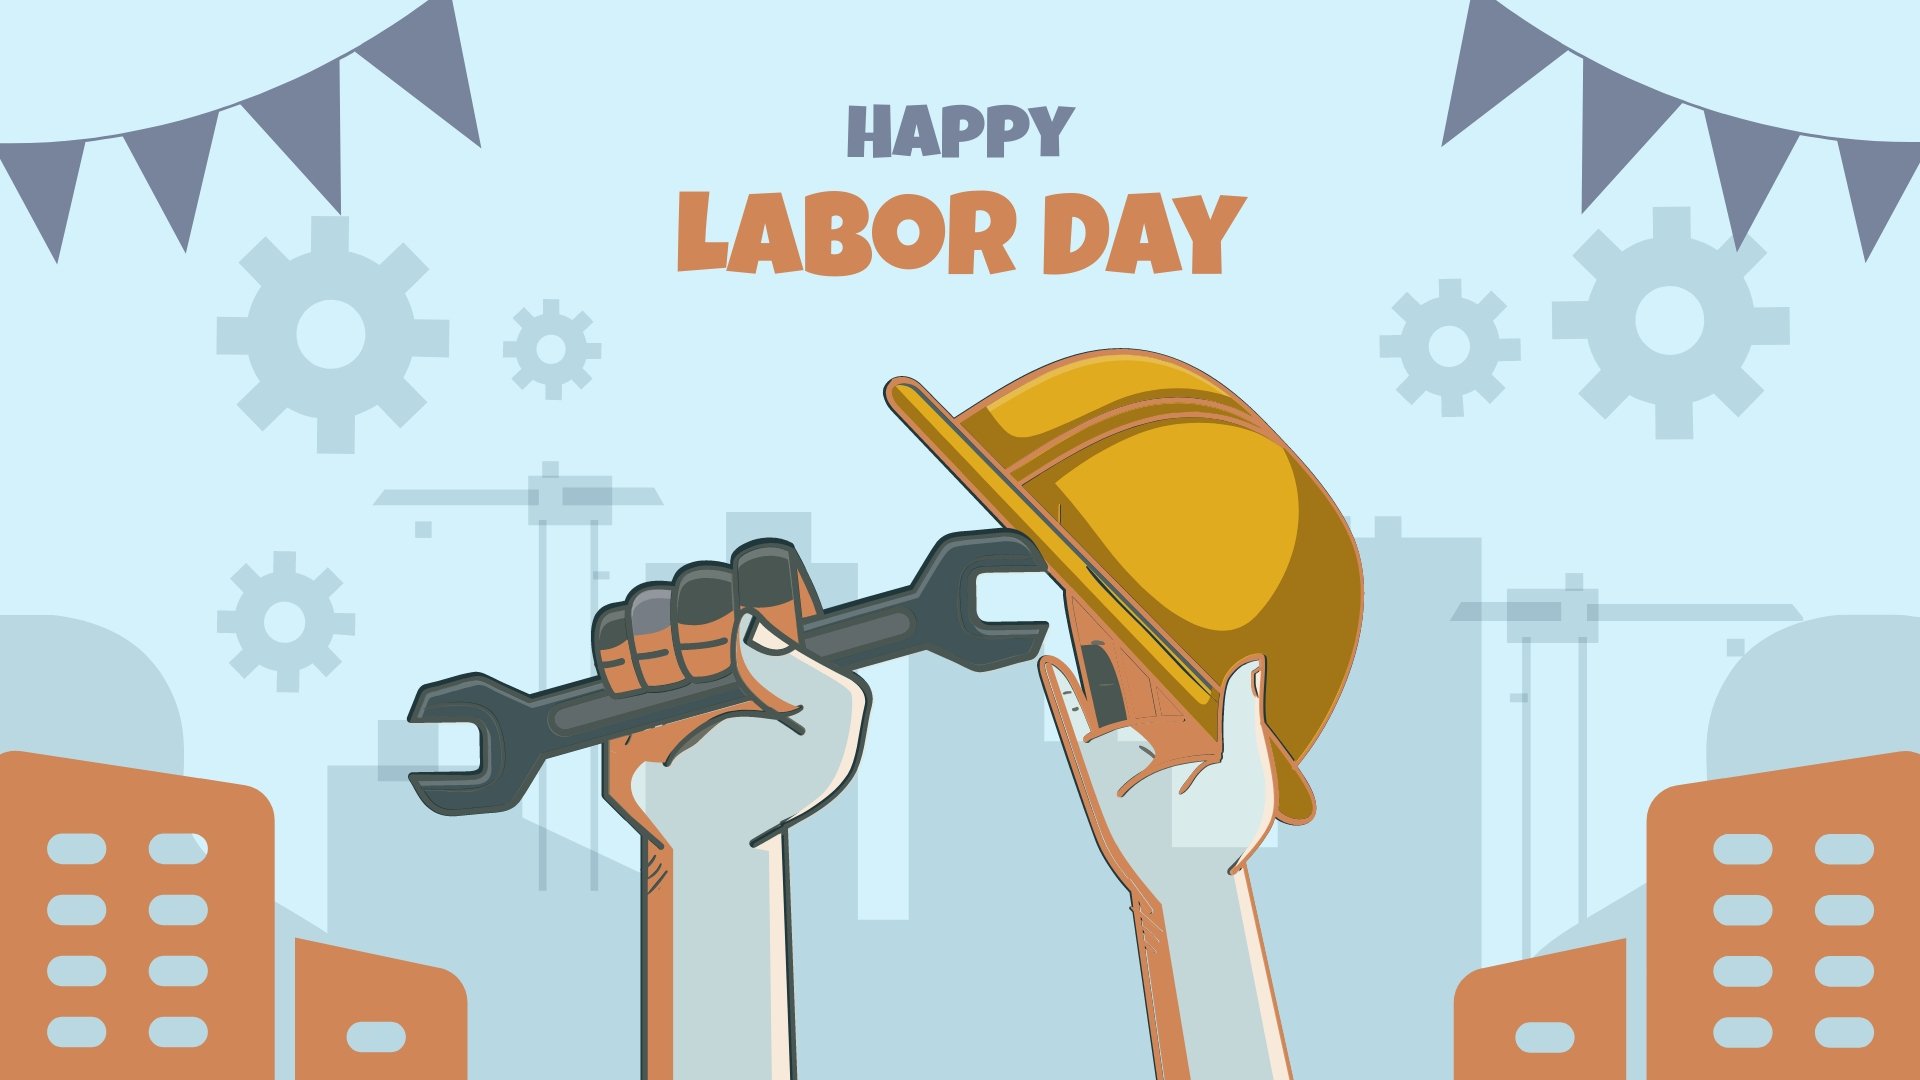 Labor Day Image Template